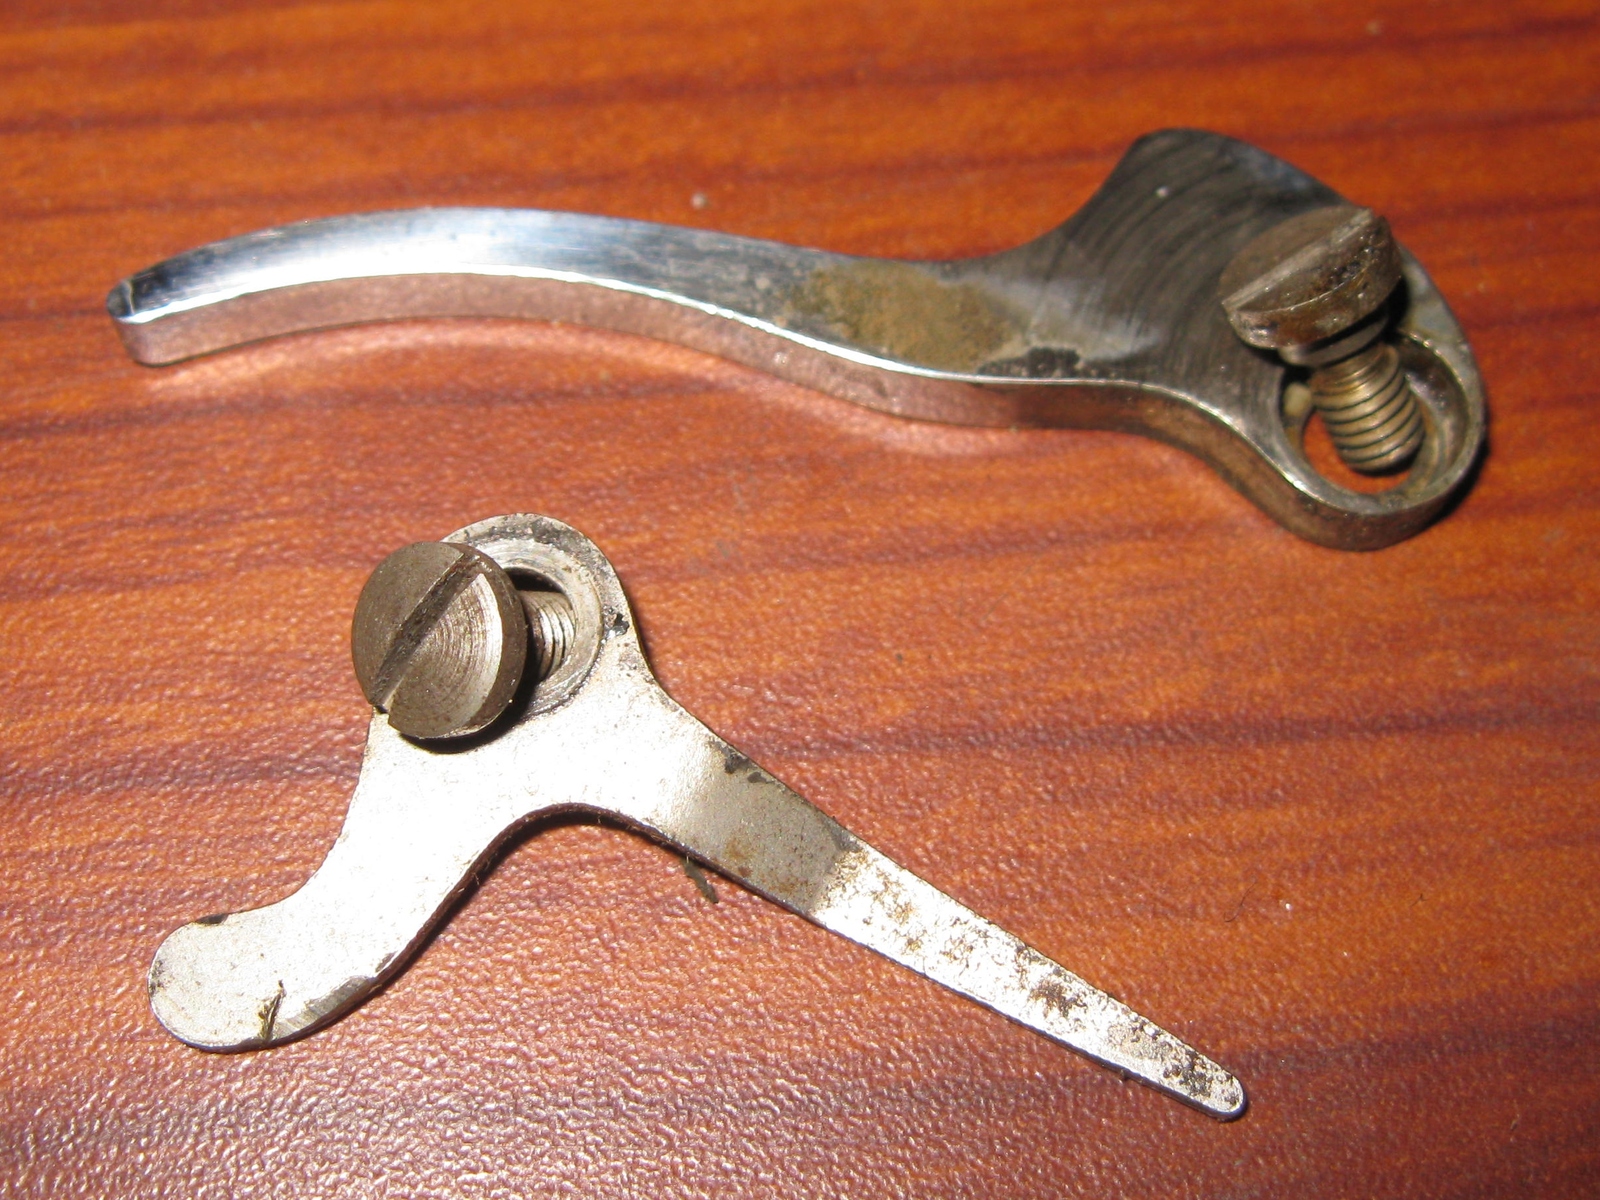 Wards Brunswick National Sewing Machine Thumb Lifter Bar & Tension Release Lever - $9.00